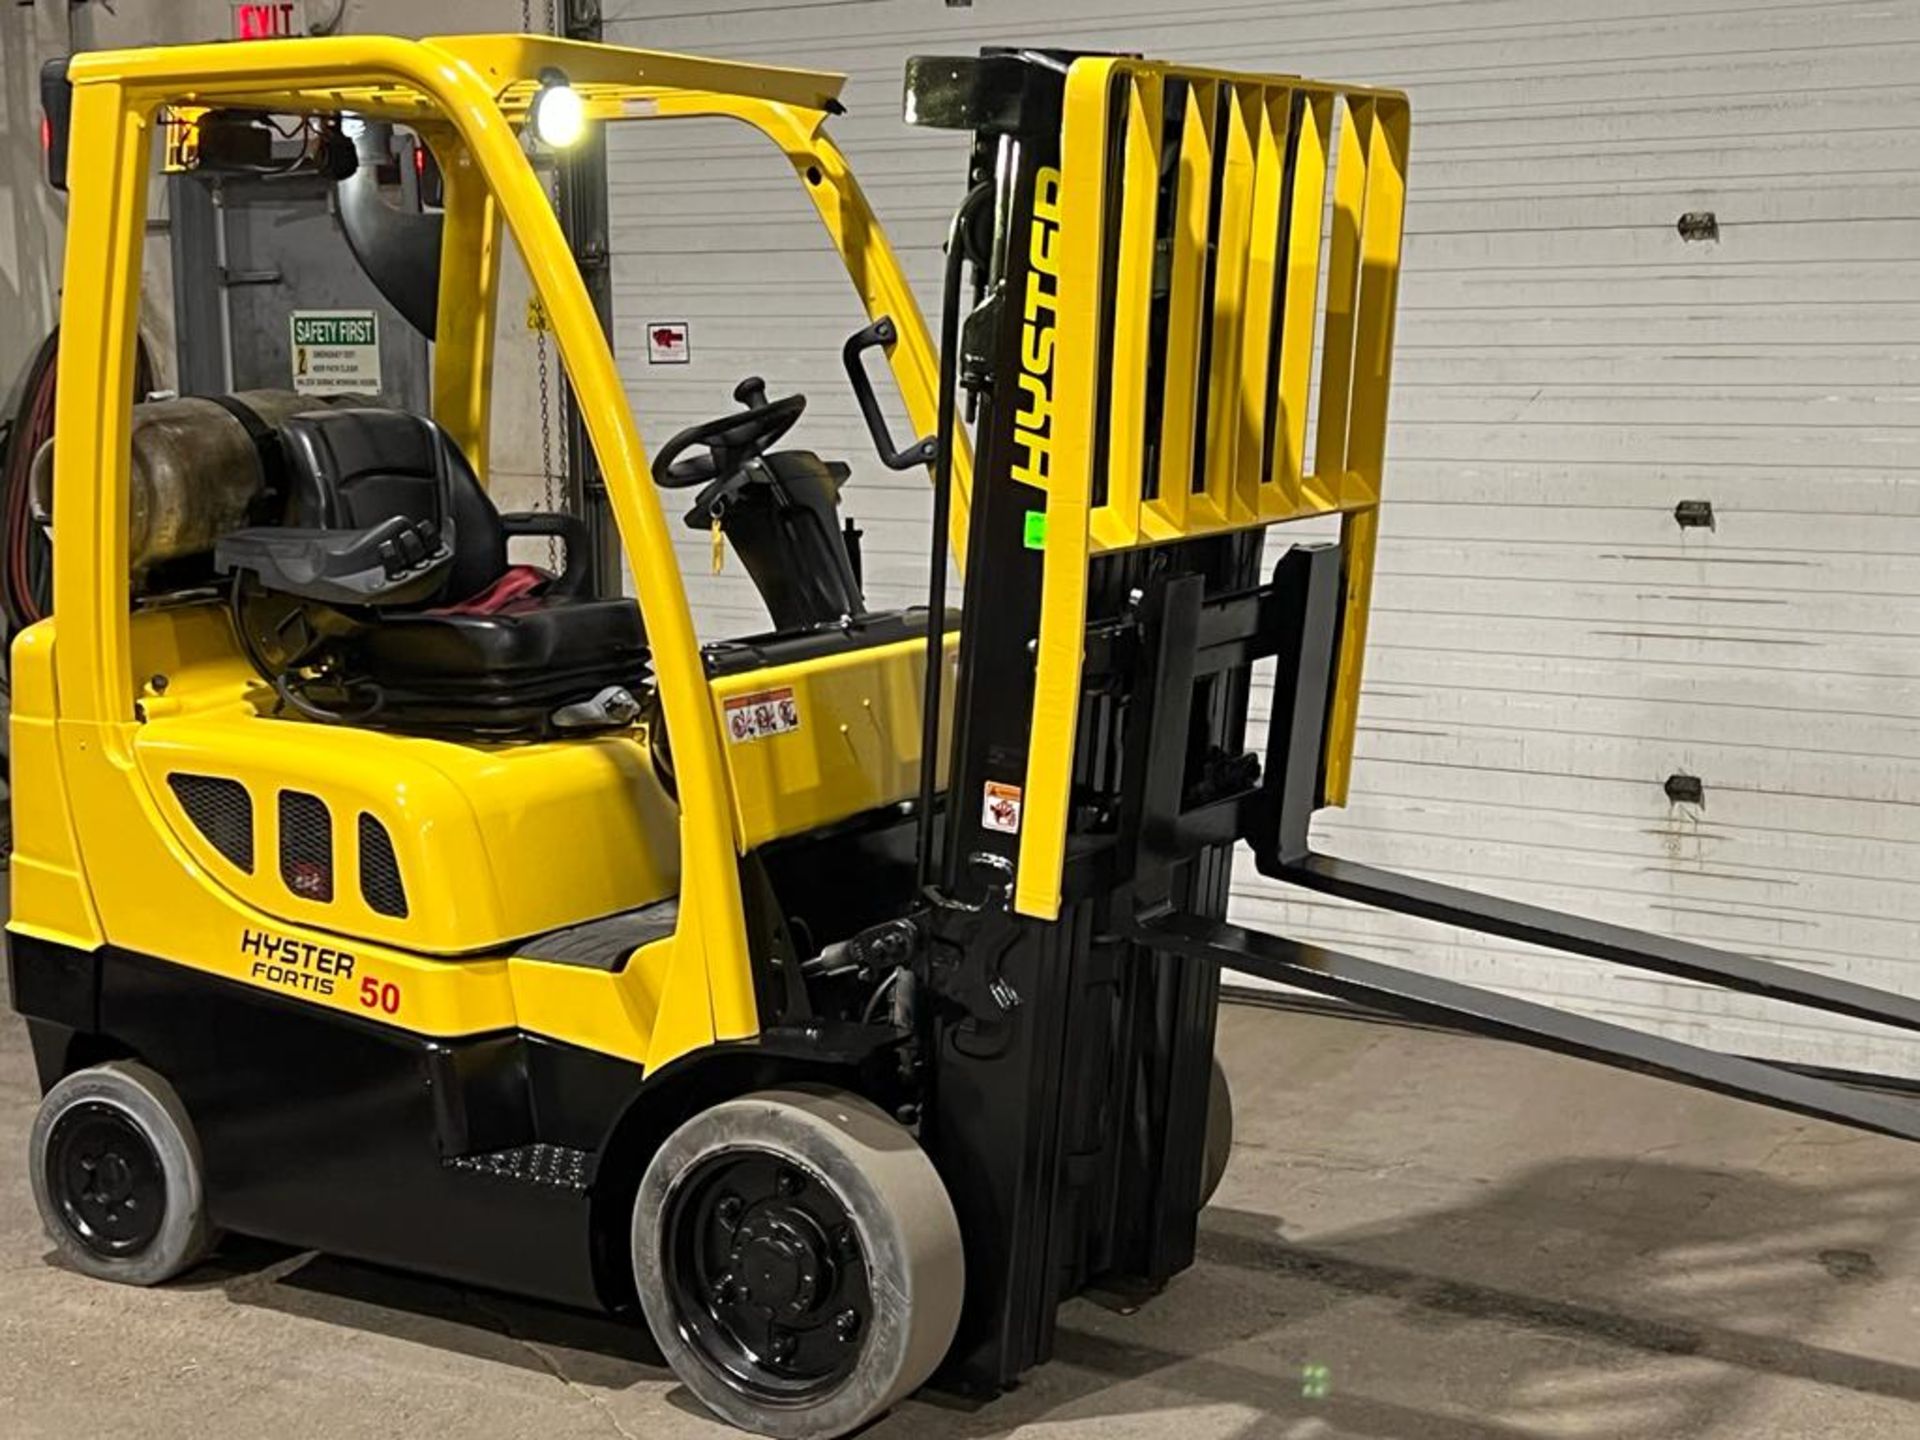 2014 Hyster 5,000lbs Forklift LPG (propane powered) with Sideshift and 3-stage Mast (no propane tank - Image 2 of 5